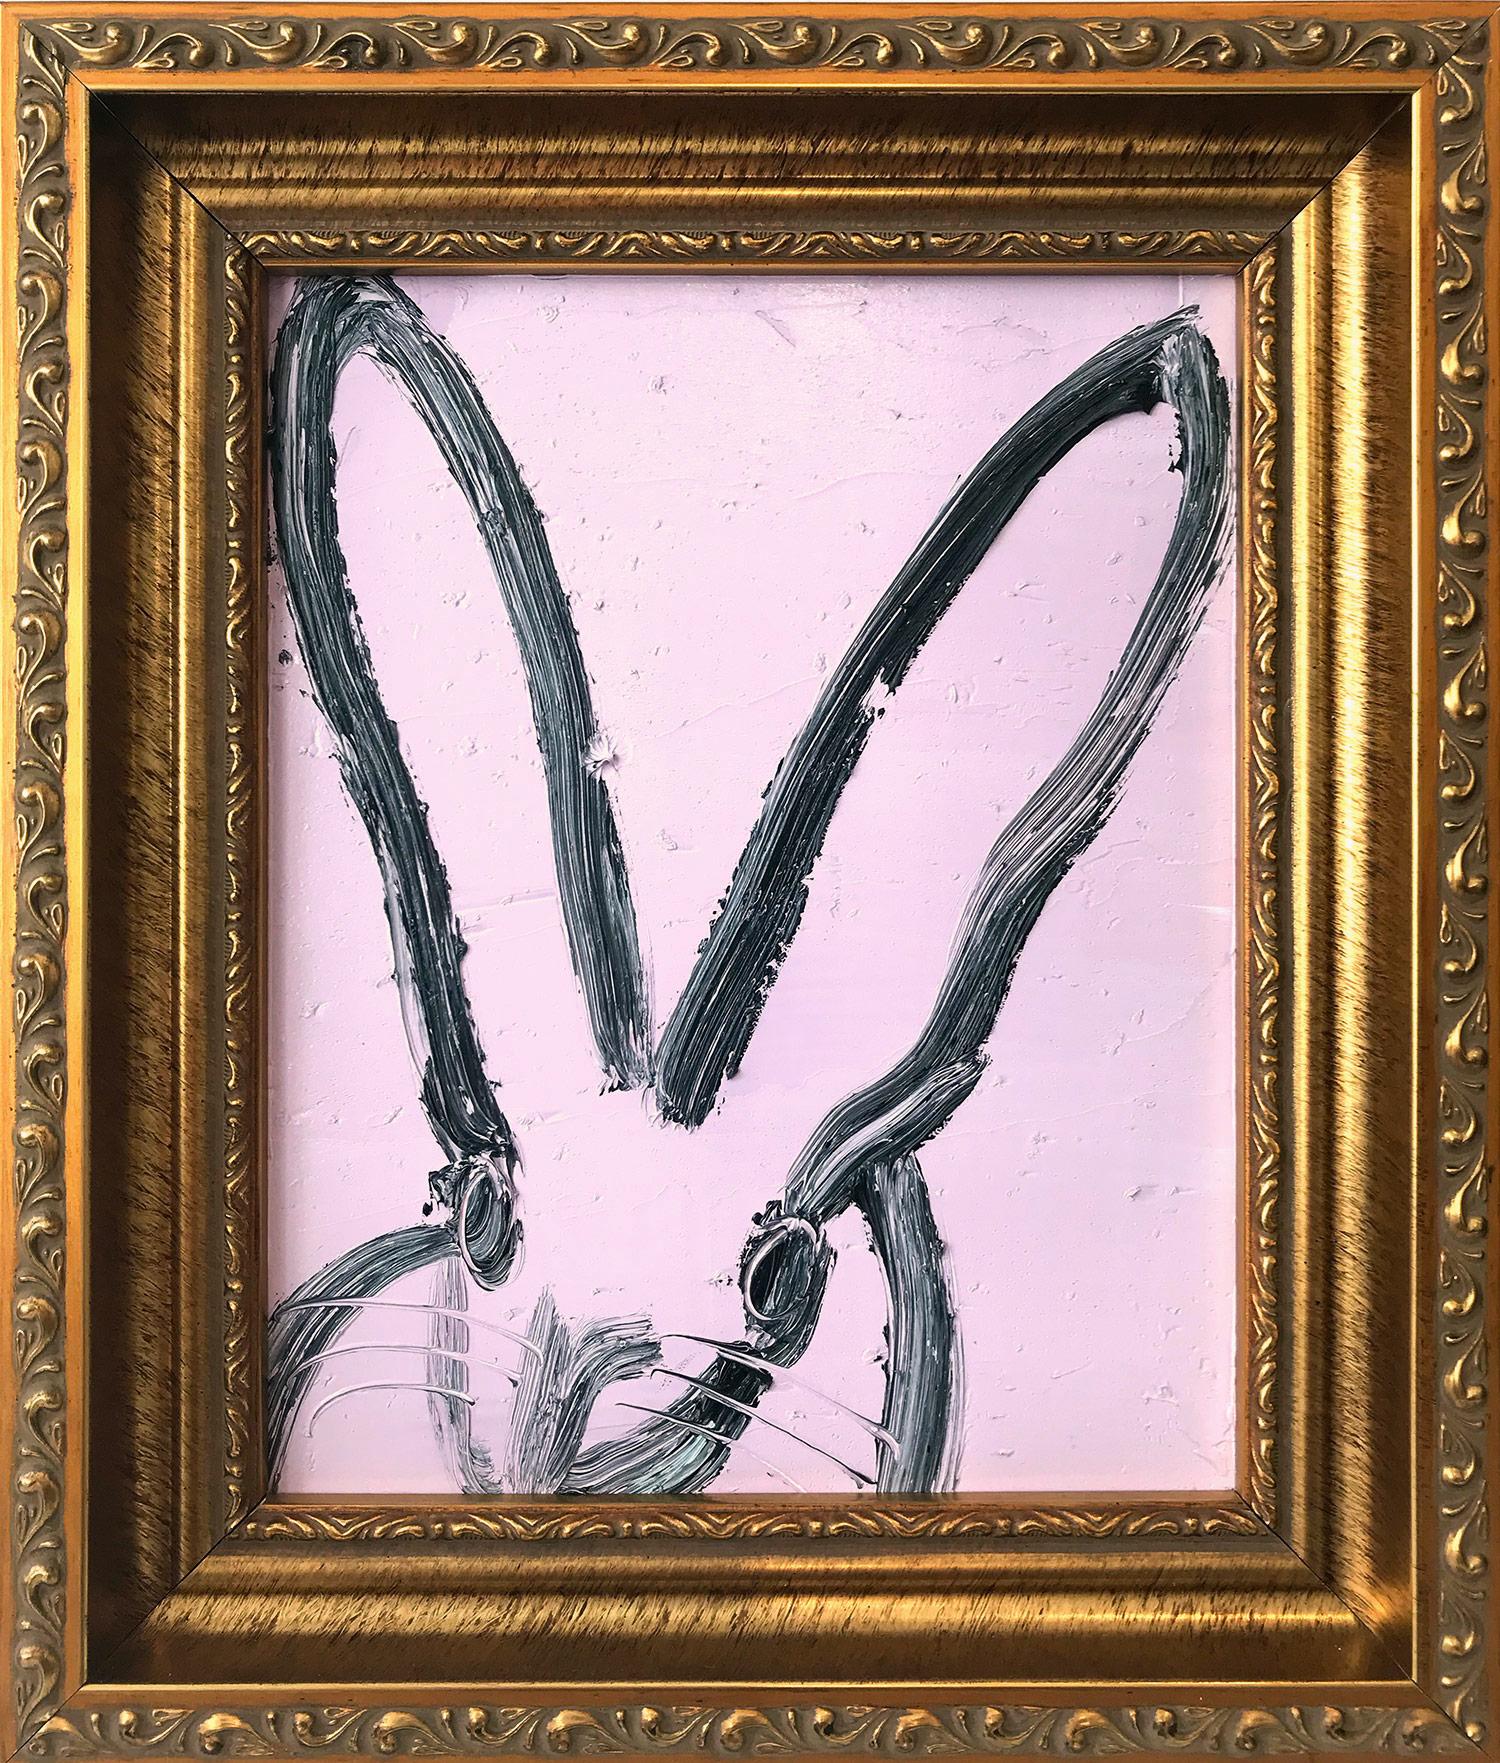 Hunt Slonem Abstract Painting - "Viola" (Bunny on Light Lavender Background) Oil Painting on Wood Panel